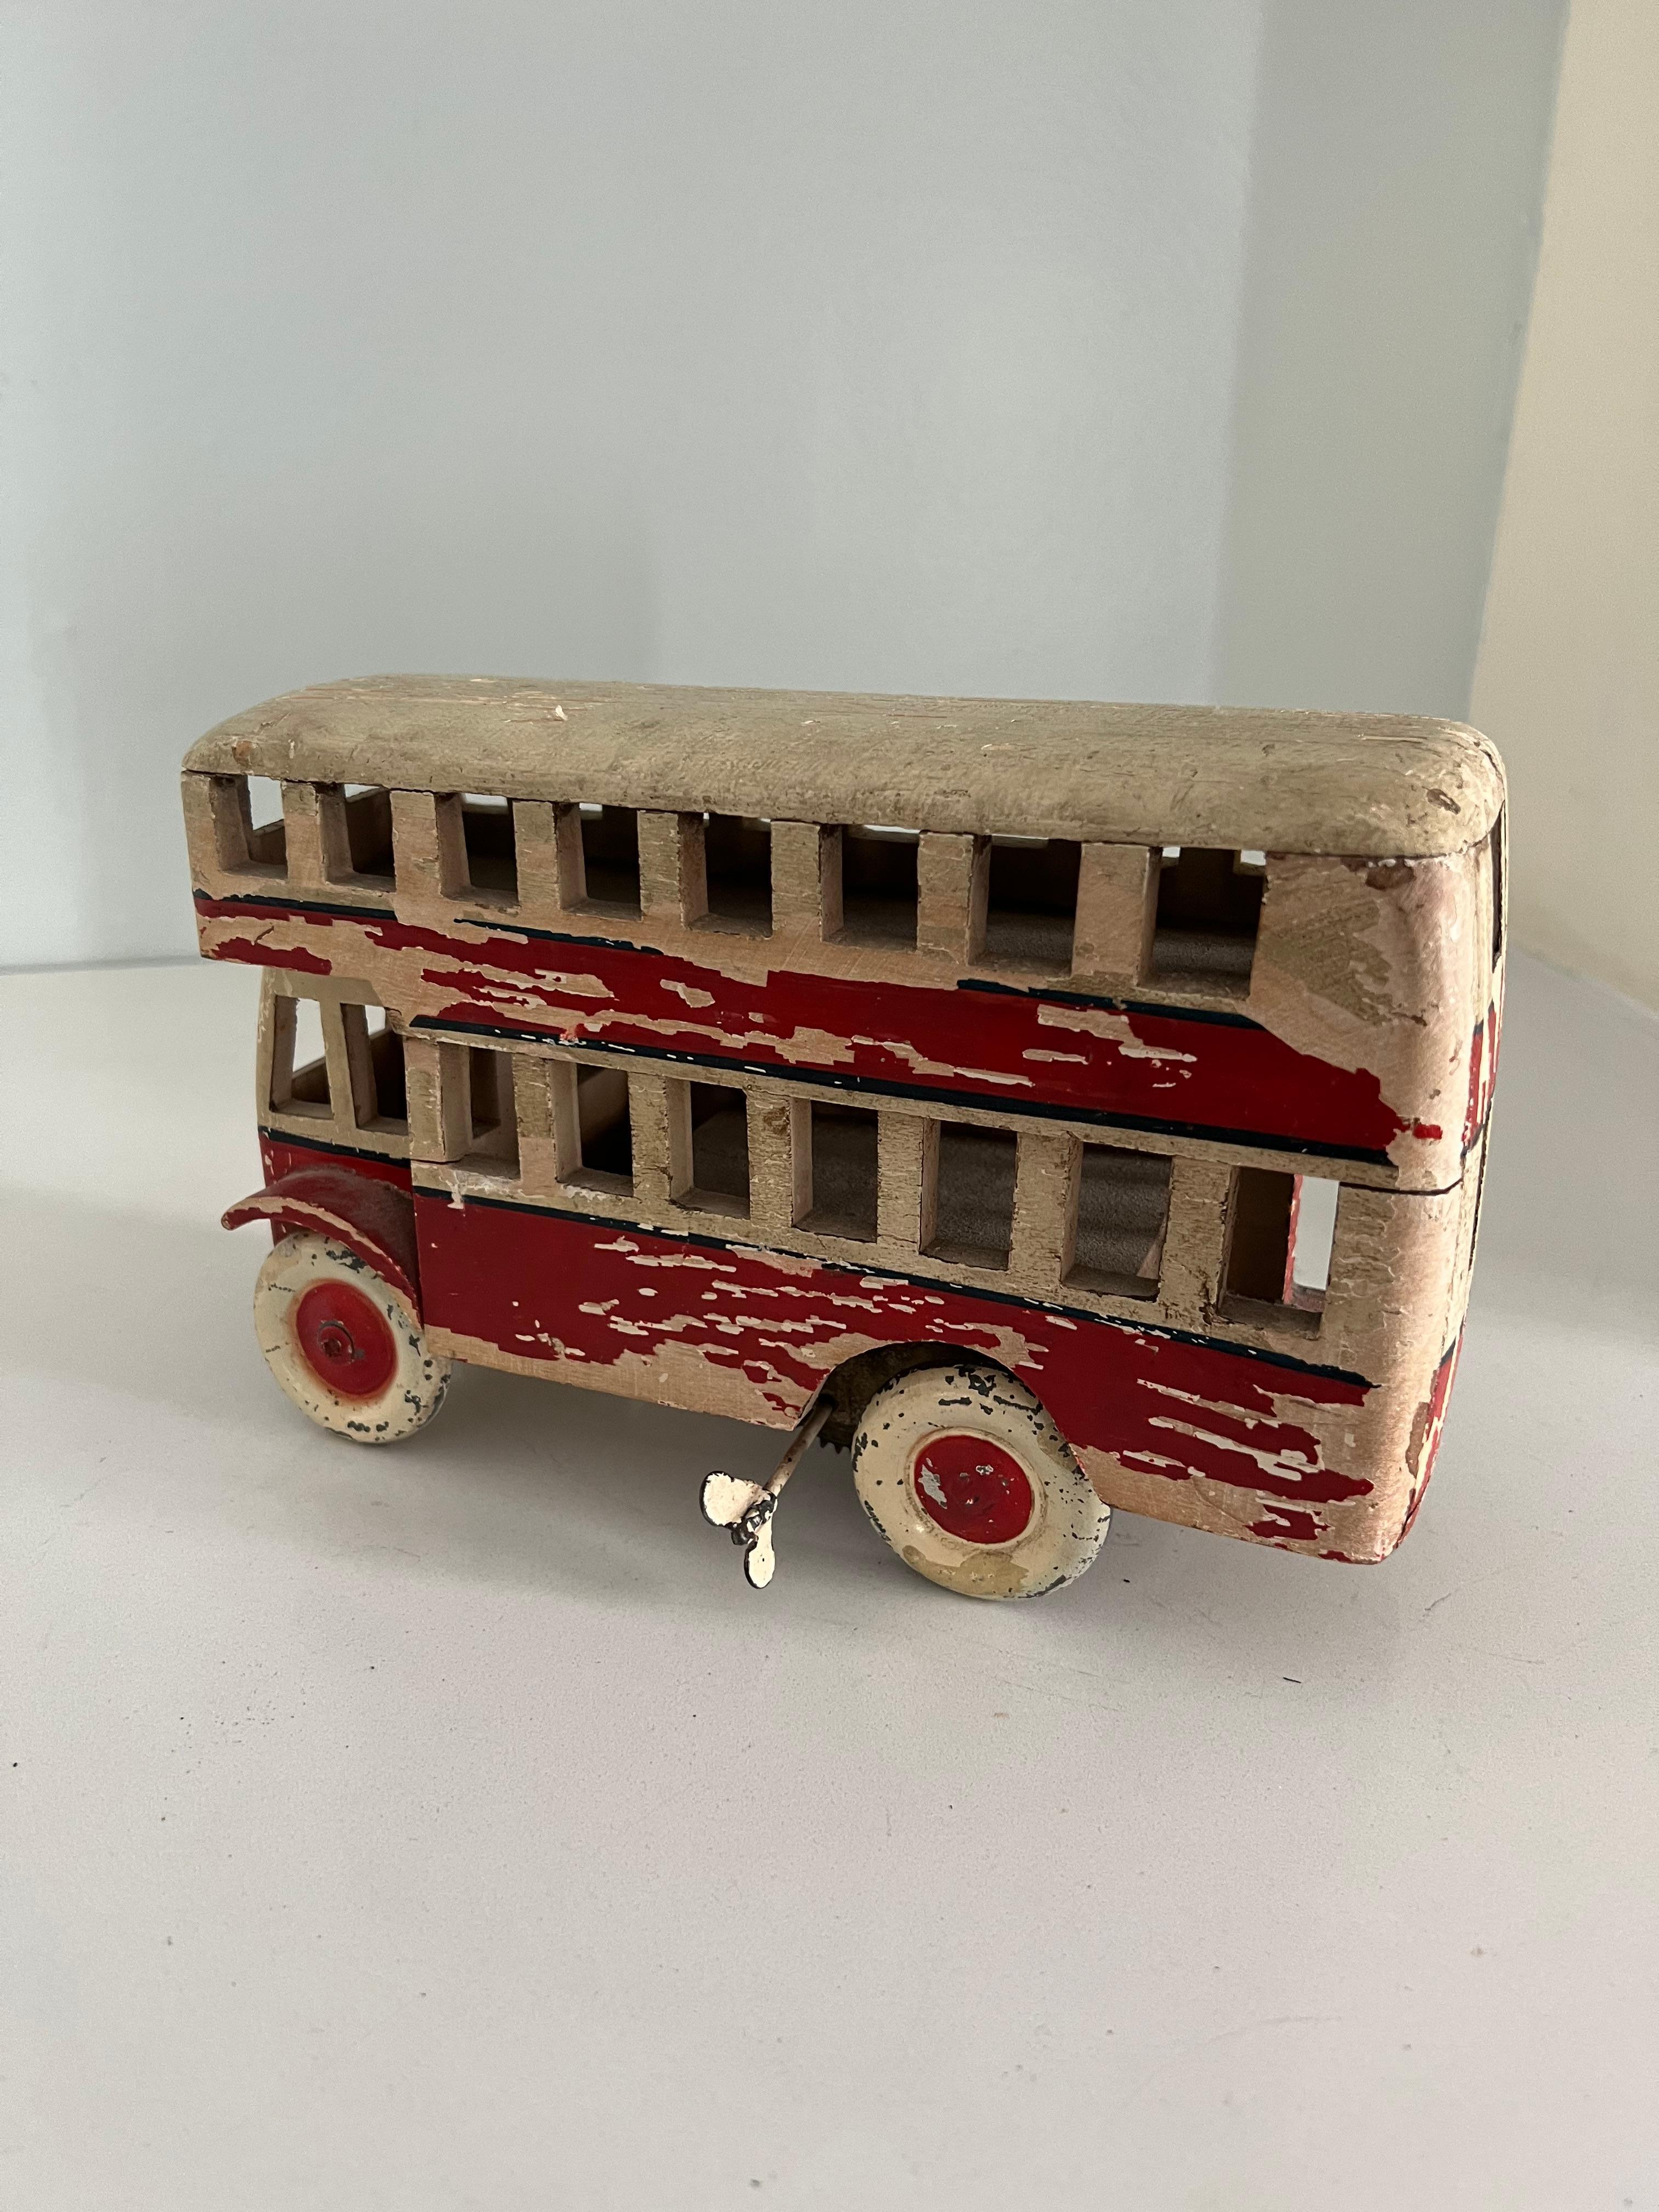 Charming painted wooden wind-up patinated white / red double-decker bus. Raw wood peeks through the original paint to make for a pleasing texture and patina. A compliment to bookshelves and baby rooms. A fun and captivating display piece. While it